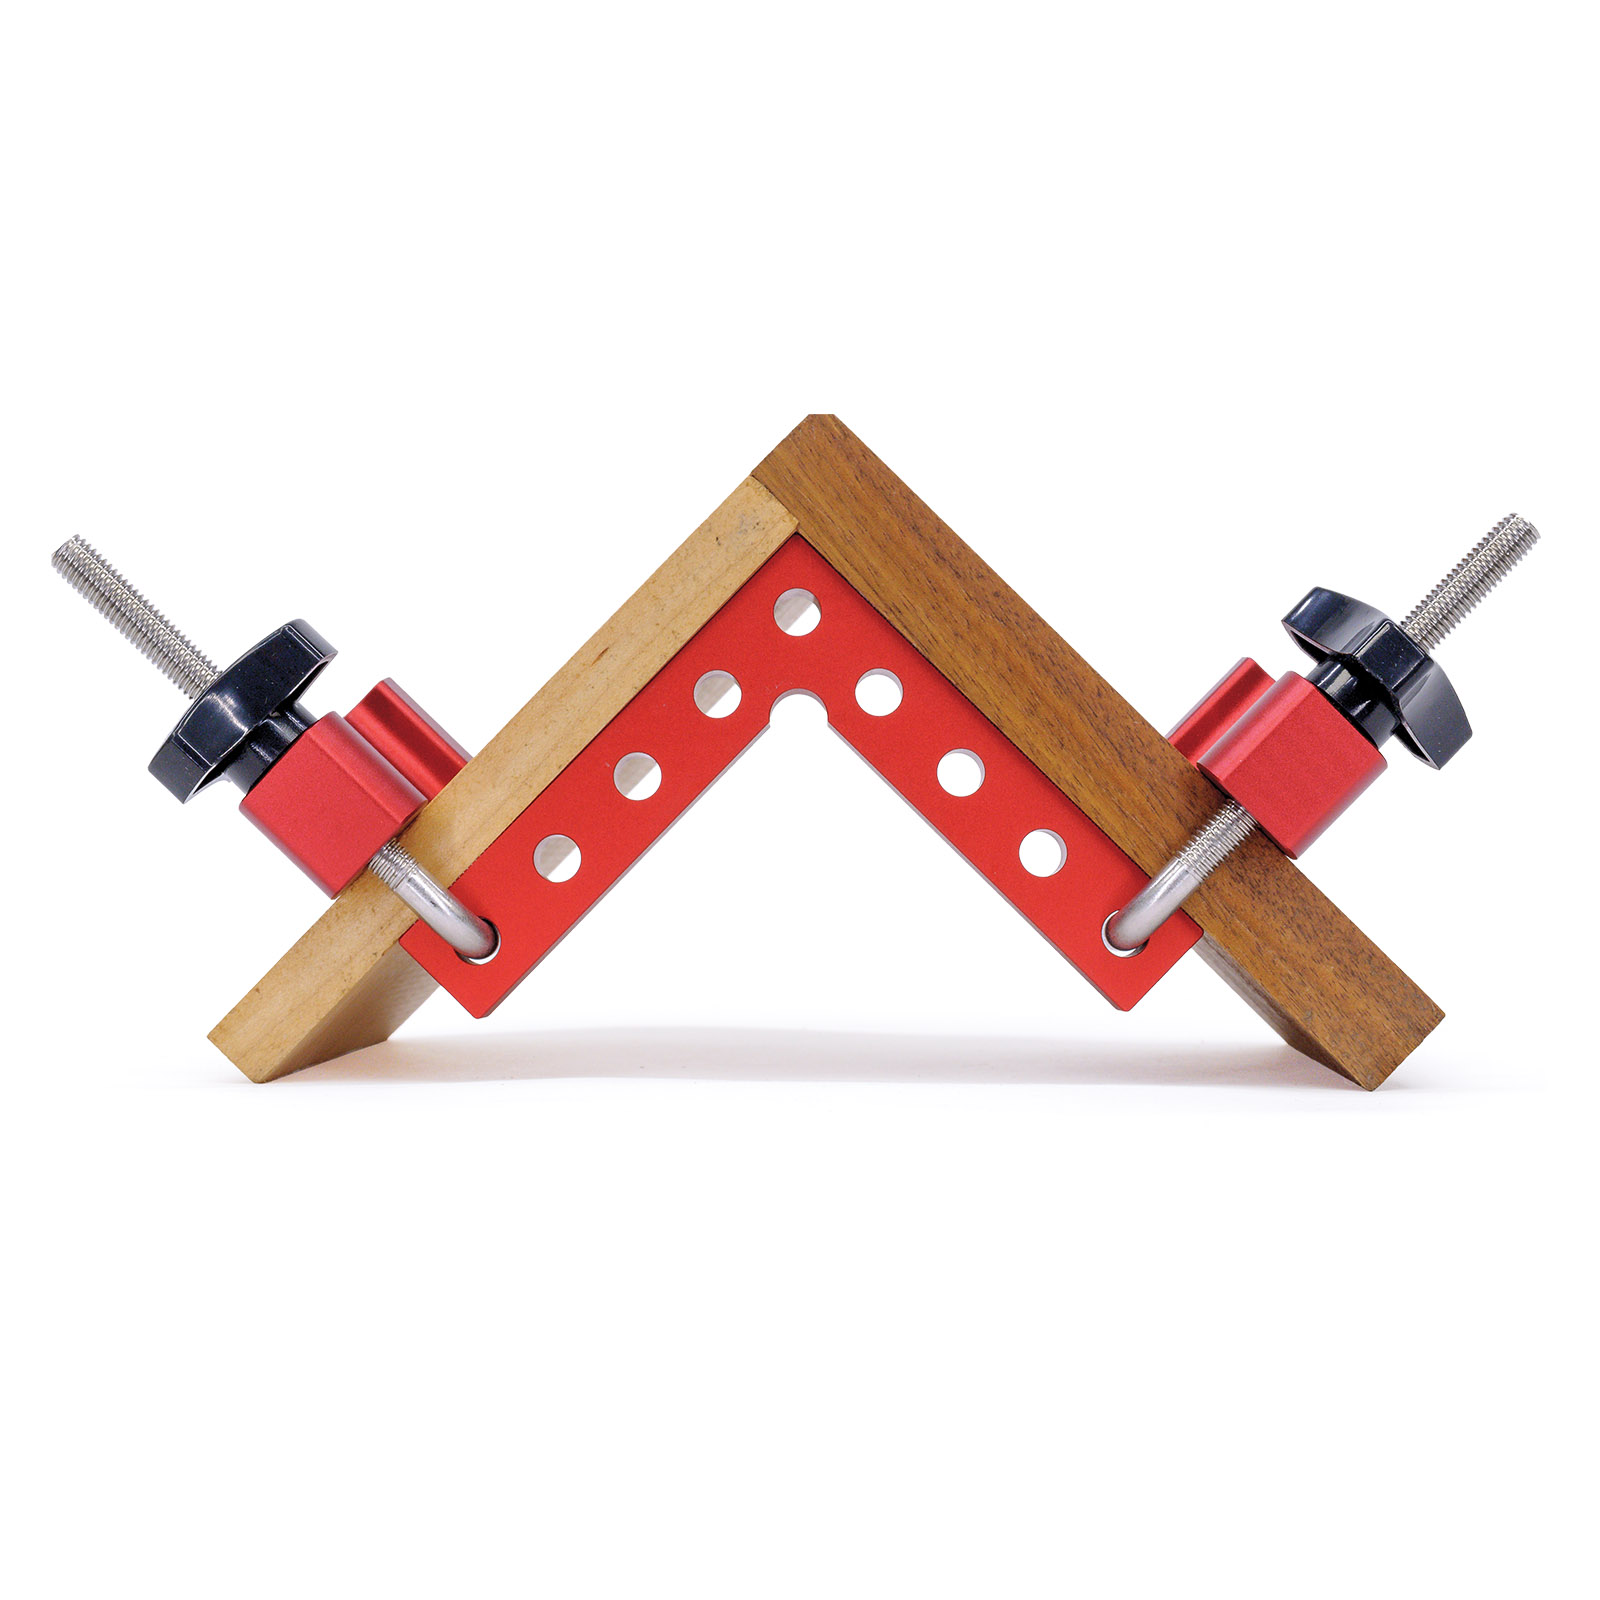 Corner Clamp-It Clips Make Cabinet Assembly Easy